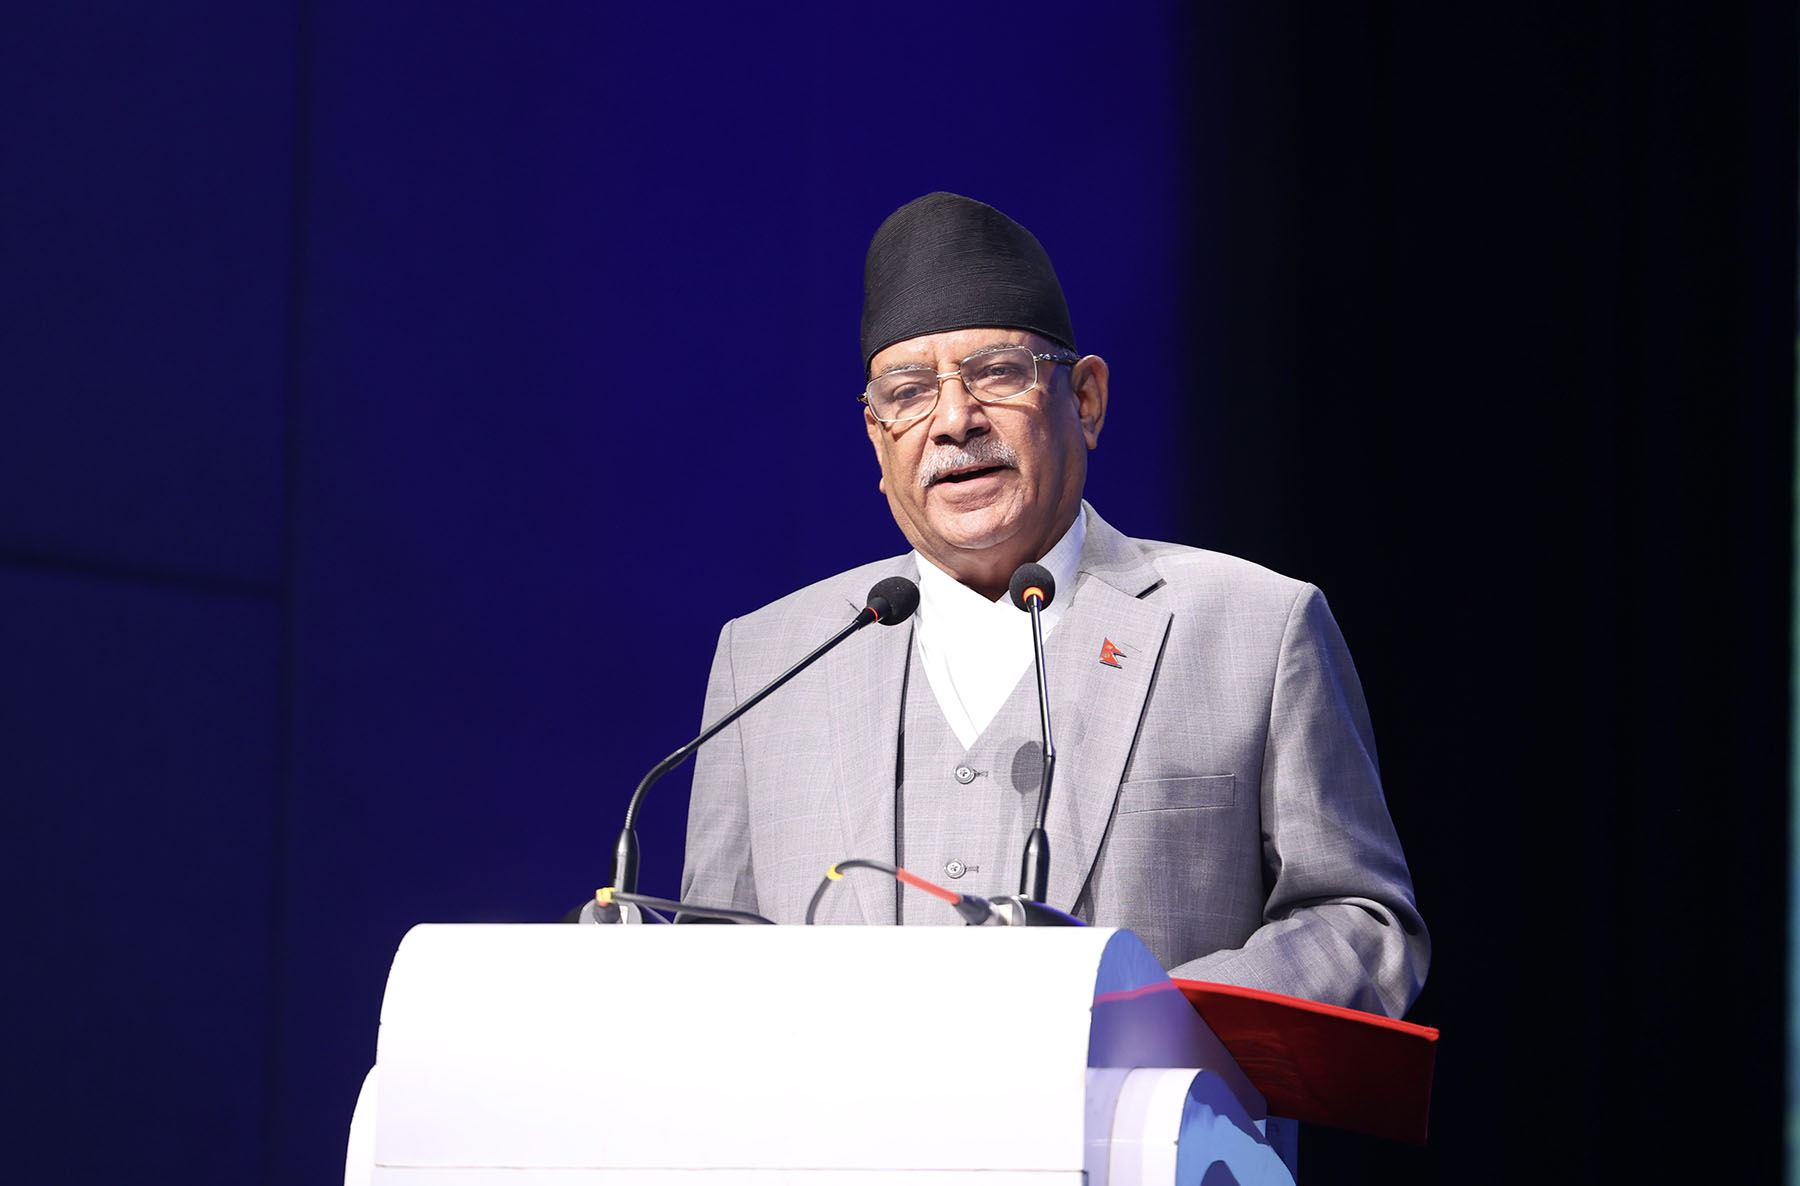 Nepal is committed to liberal economic policy, you are welcome to invest here: PM Dahal